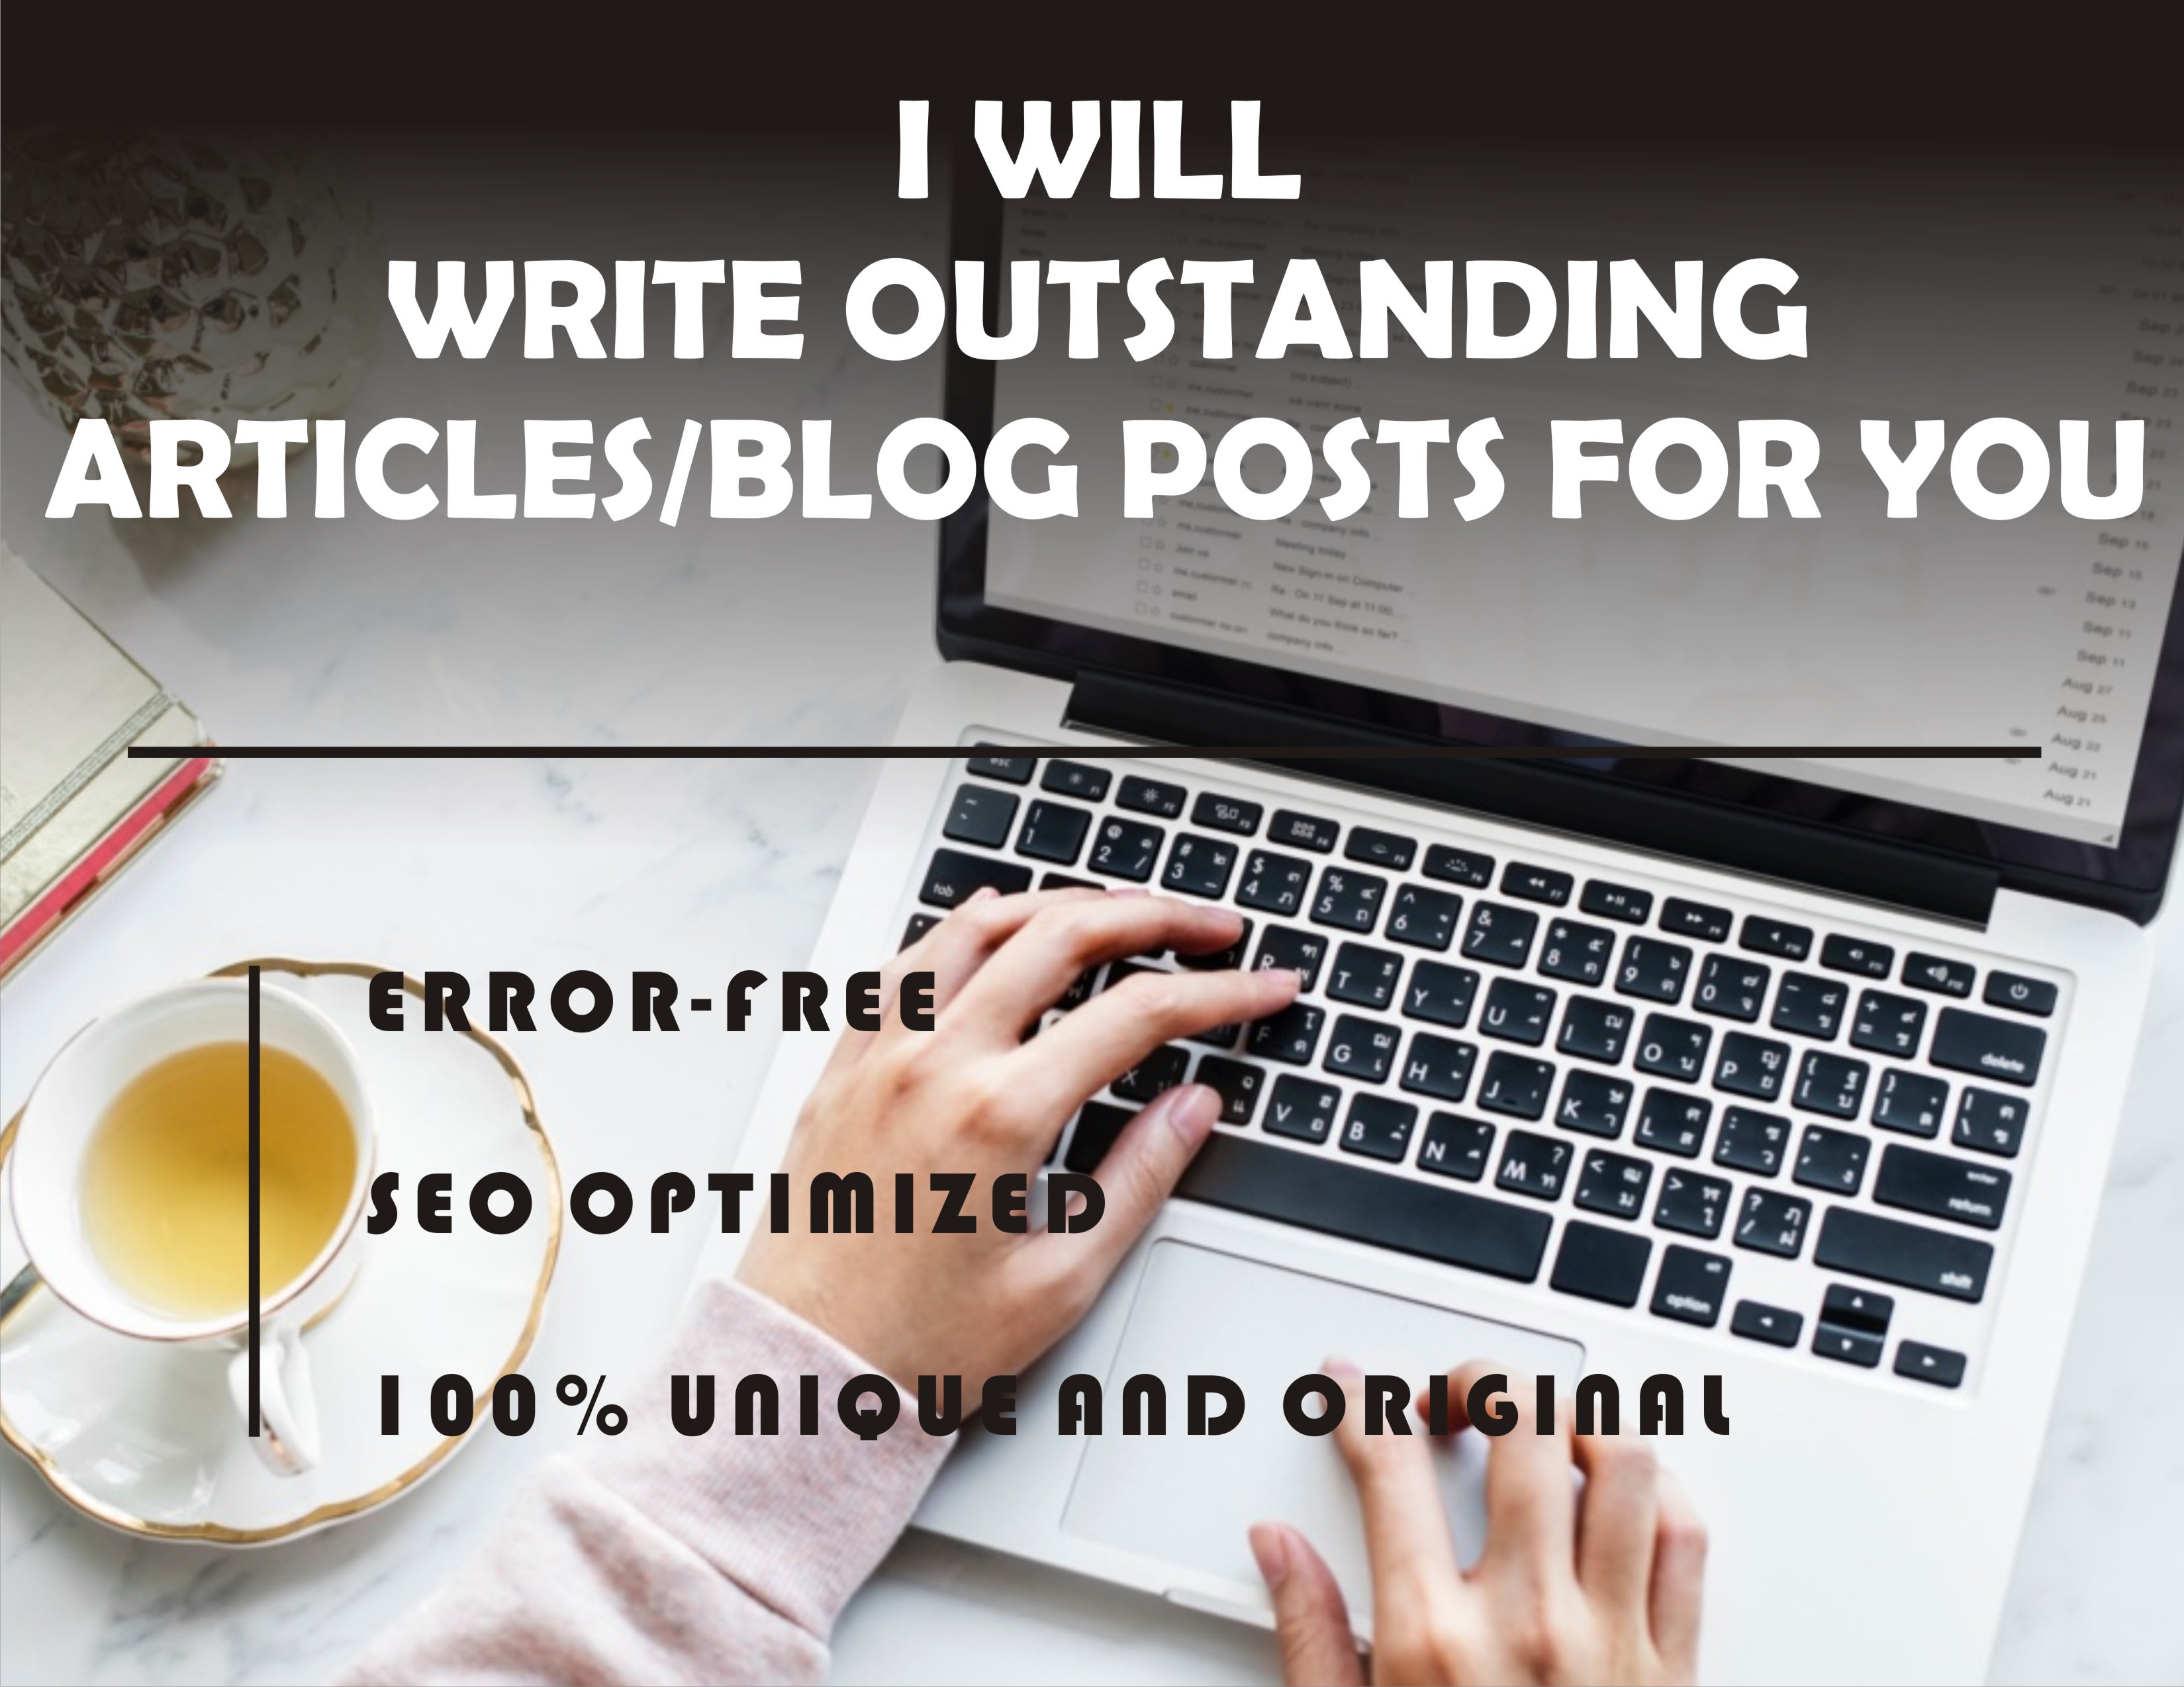 I will be your SEO content writer, website content, and blog writer